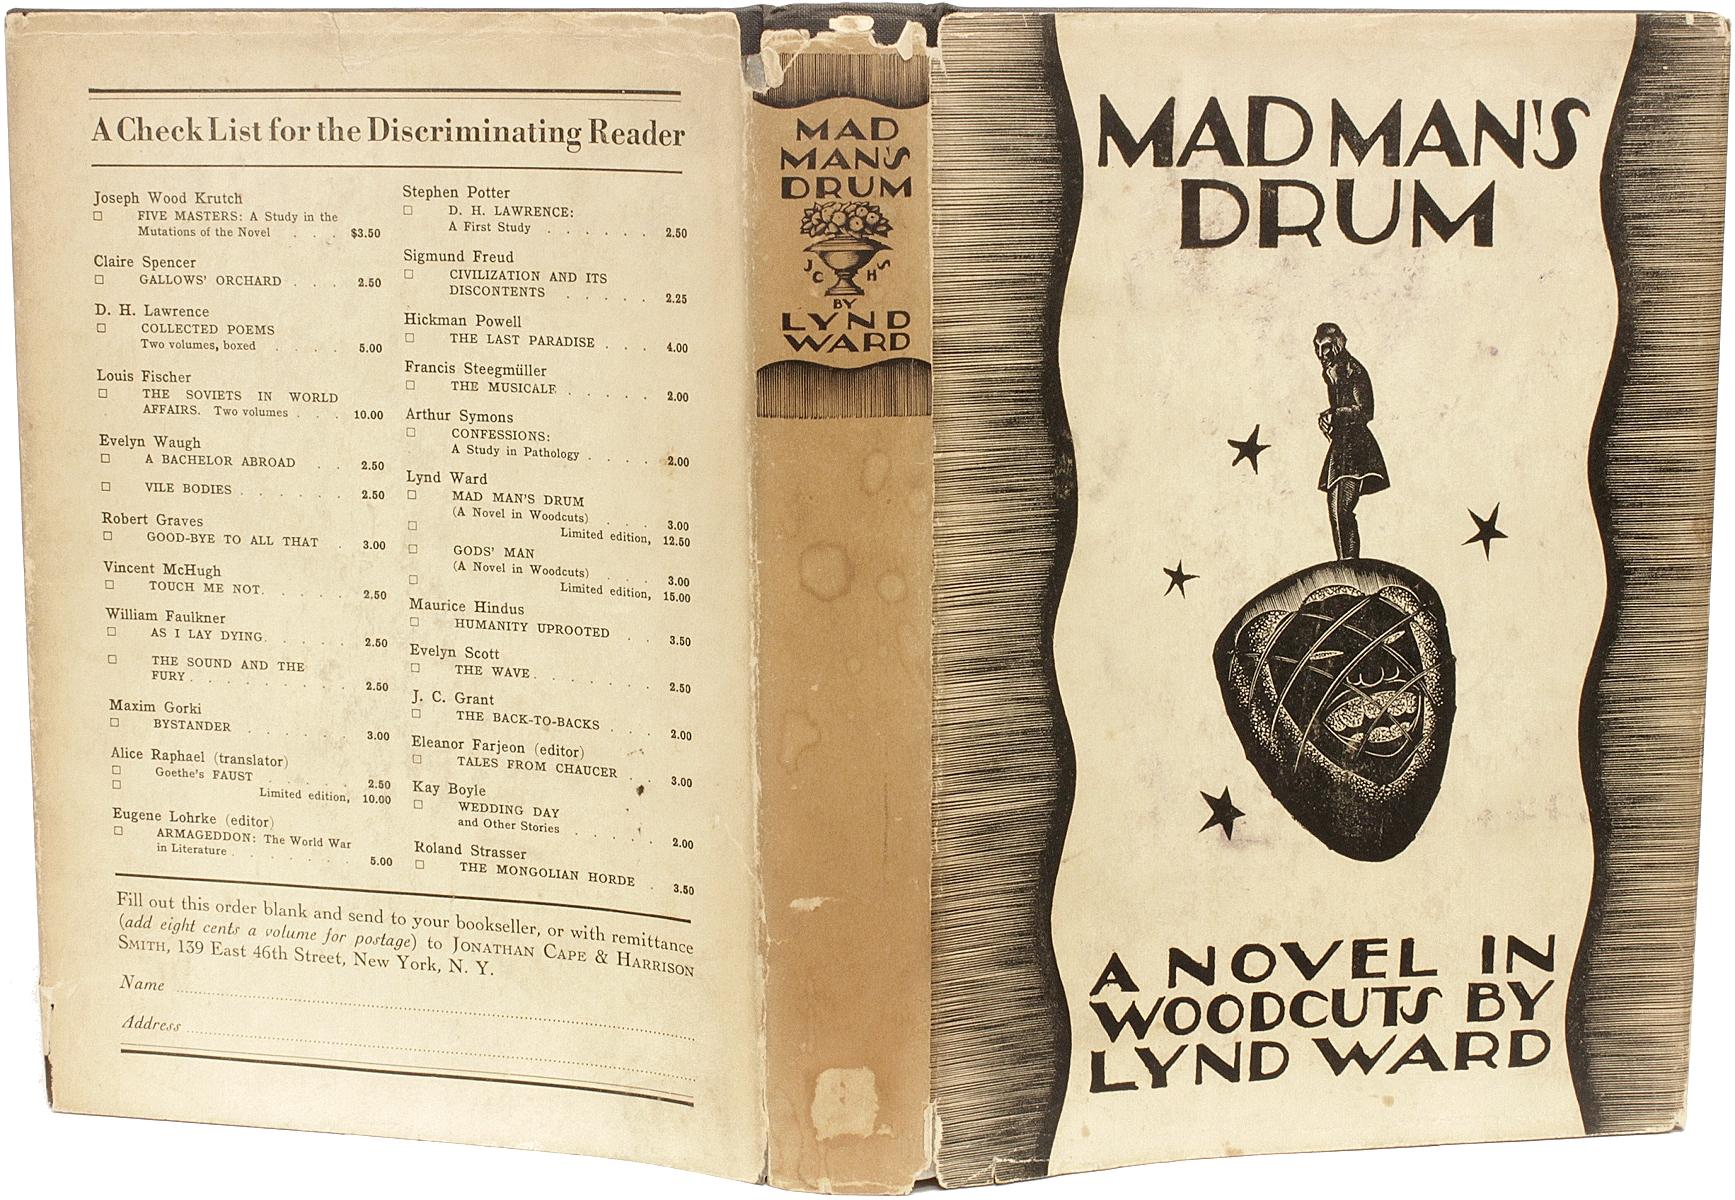 Author: WARD, Lynd. 

Title: Madman's Drum. A Novel In Woodcuts by Lynd Ward.

Publisher: NY: Jonathan Cape & Harrison Smith, 1930.

SECOND PRINTING. 1 vol., hardbound, with the DJ.

Condition: Internally clean and bright, hinges fine, head